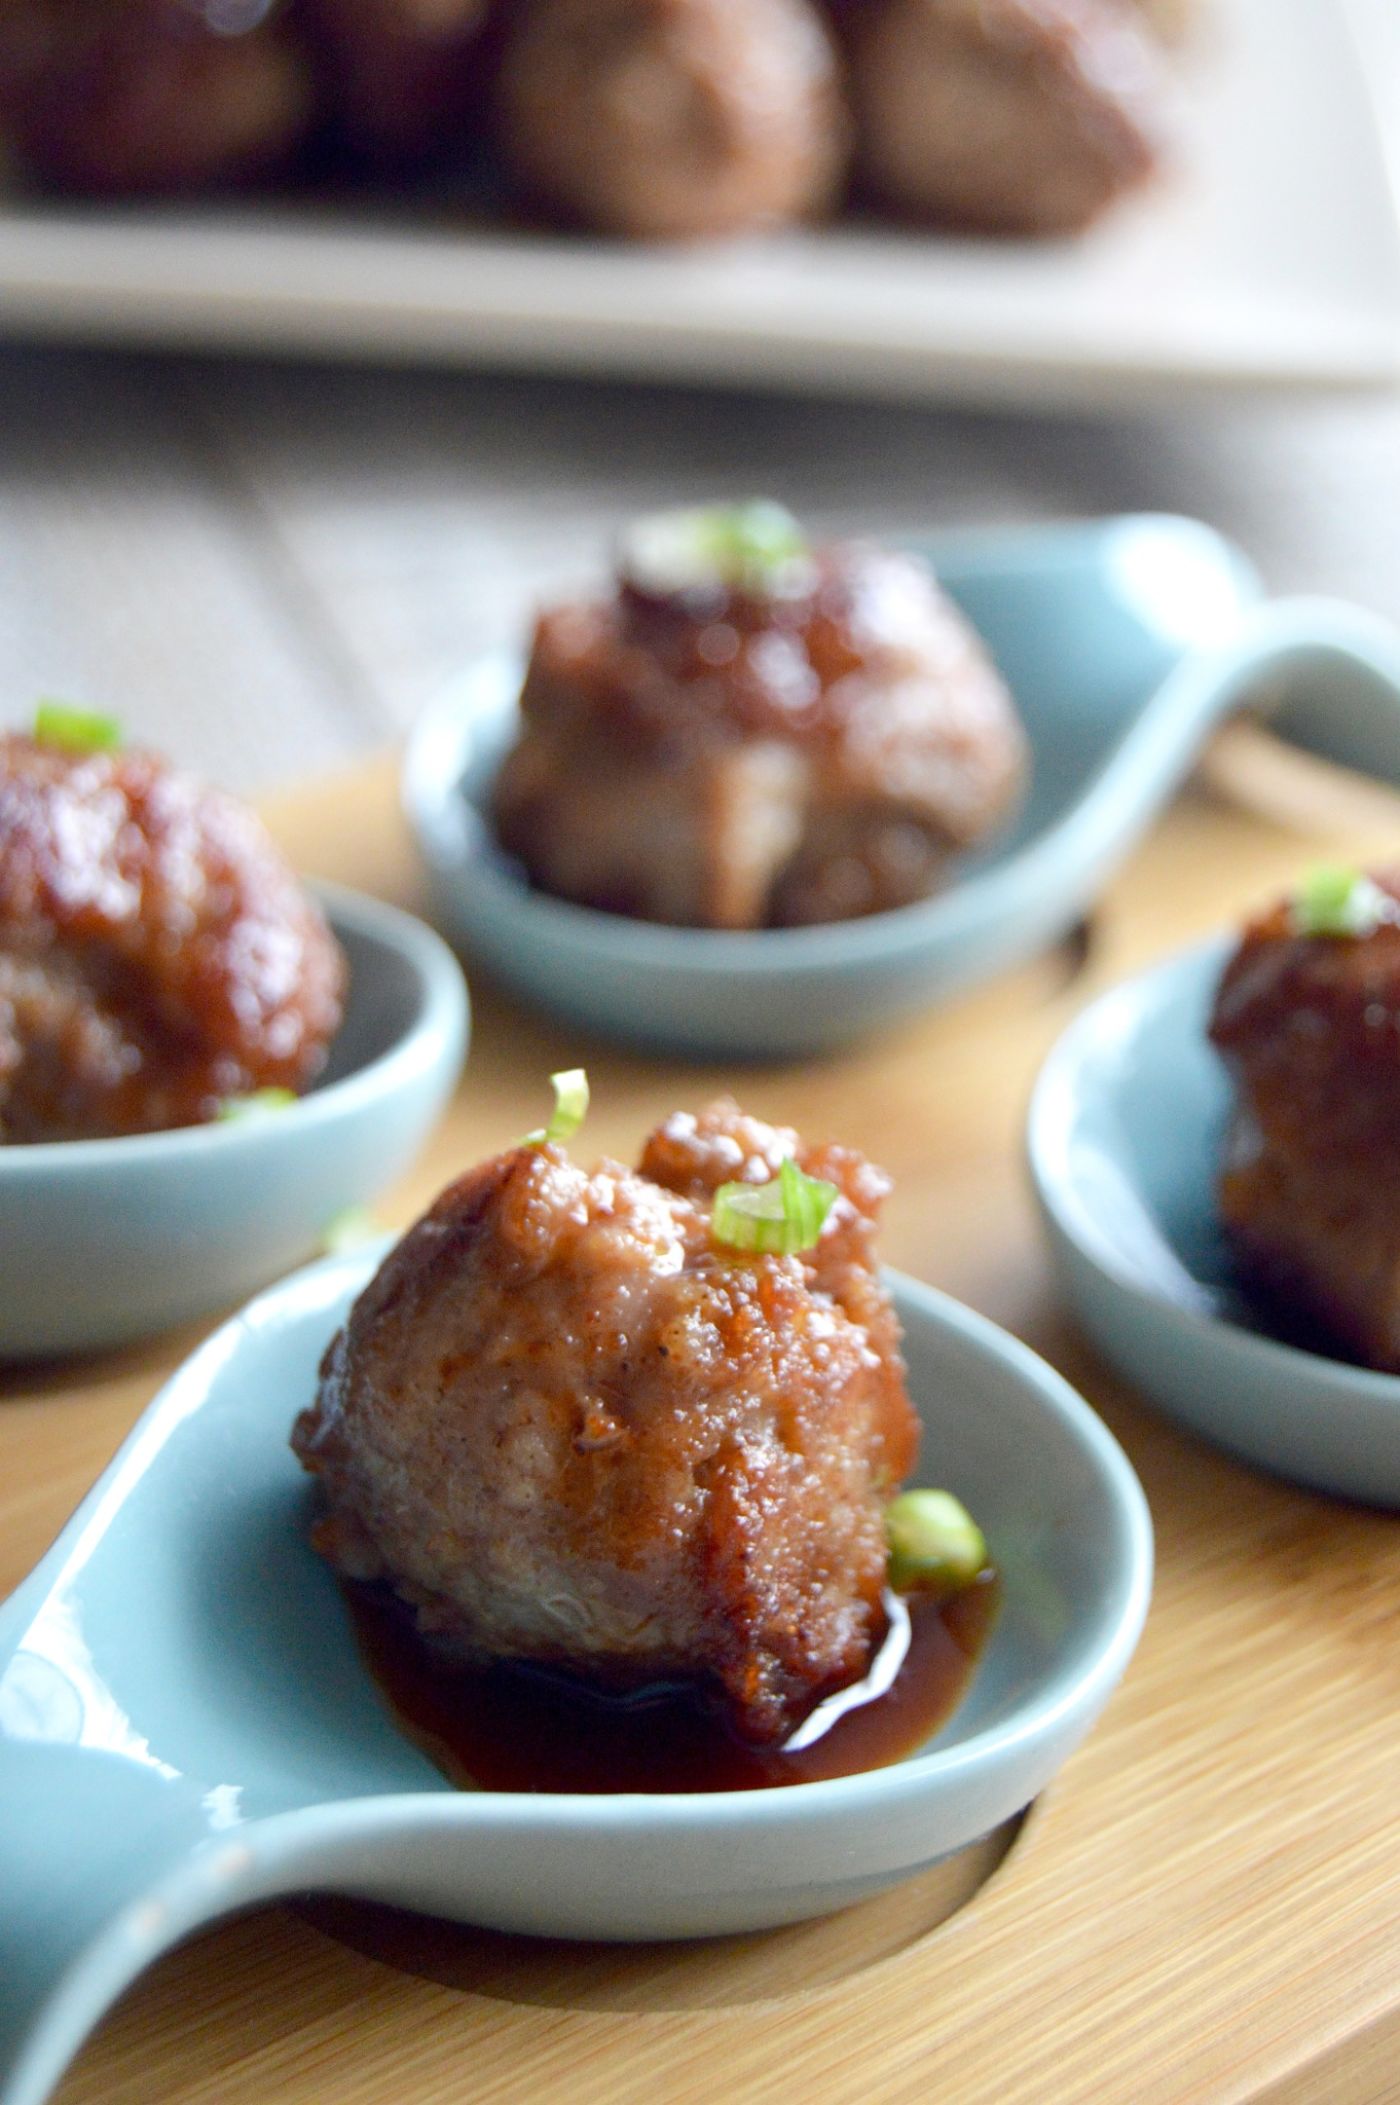 Chinese Pork meatballs: Char Seiw like charring on the edges with flavors hitting notes of sweet and salty in each that are ideal for a delicious appetizer in 20 minutes.